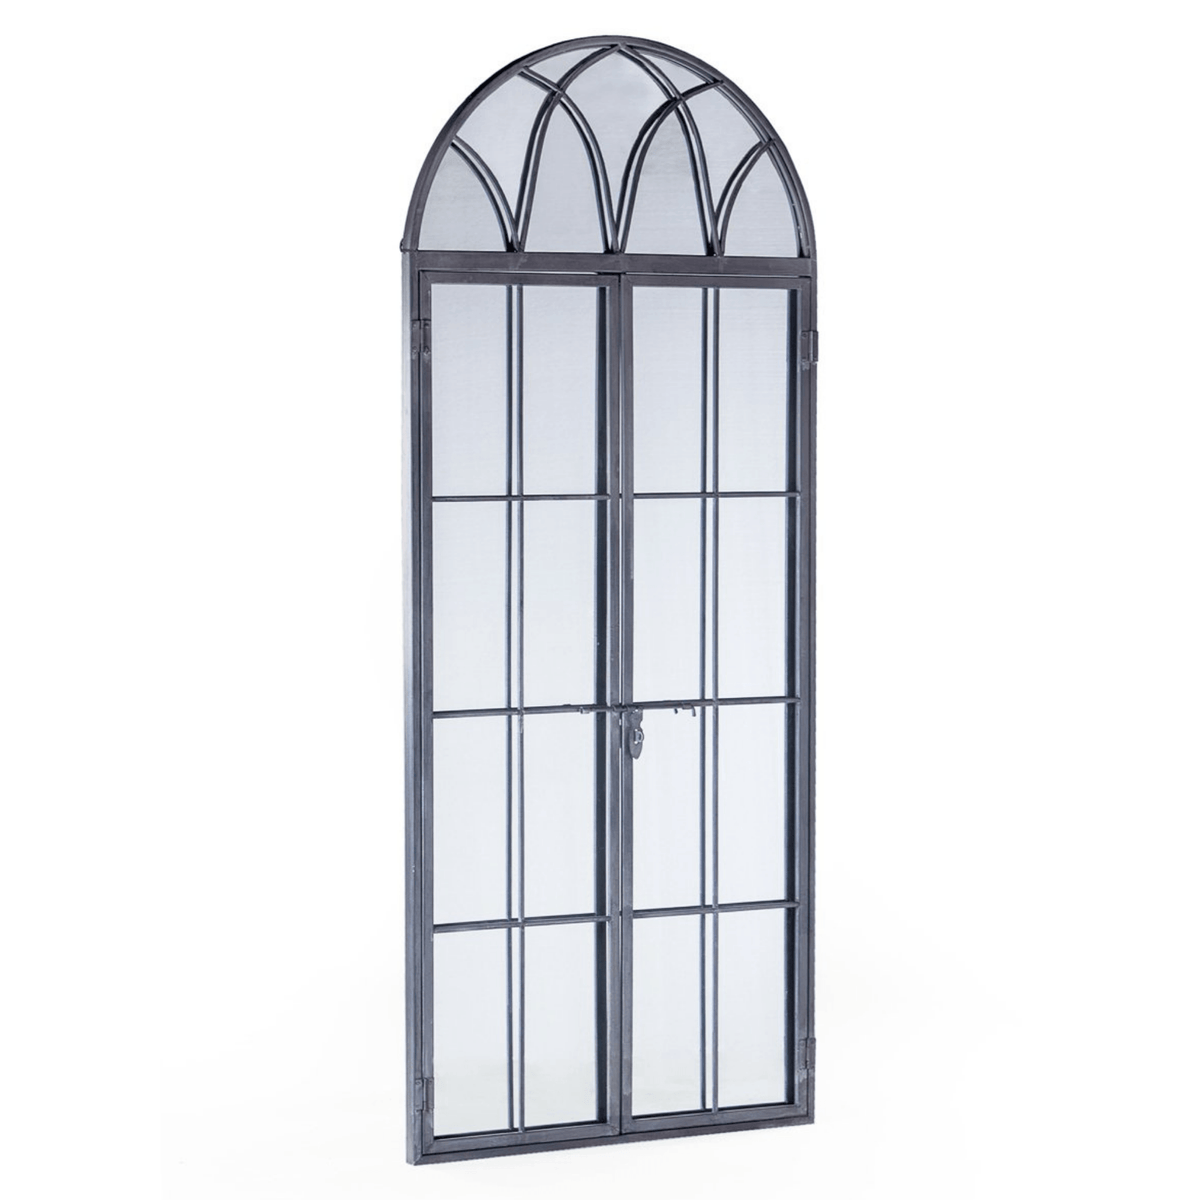 ANTIQUED LEAD IRON TALL ARCH WINDOW METAL MIRROR - Cusack Lighting